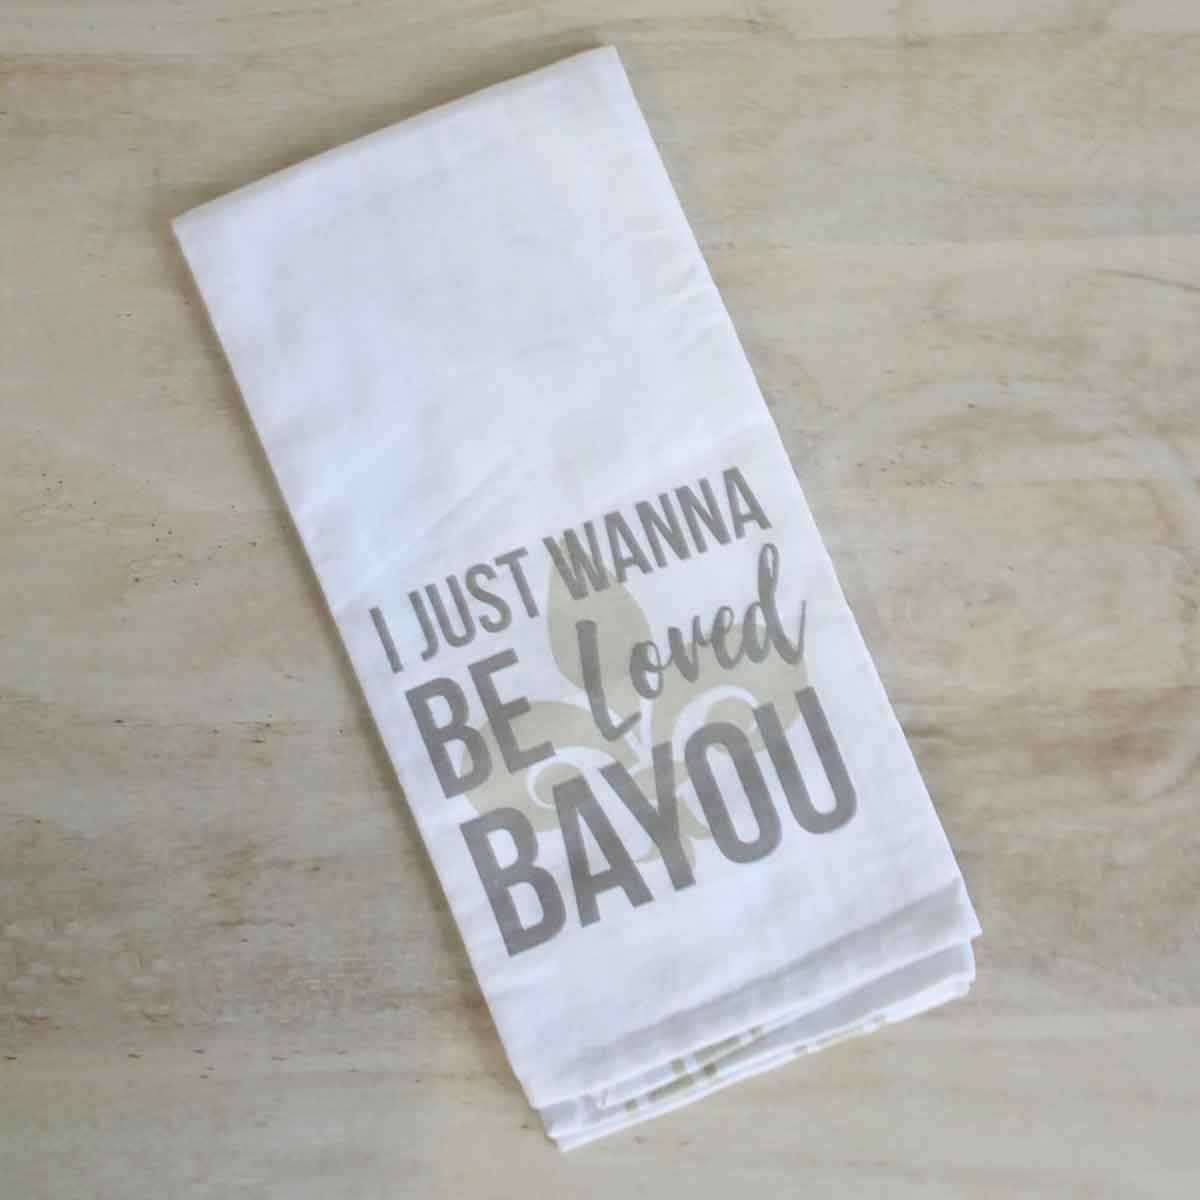 Want to be loved bayou